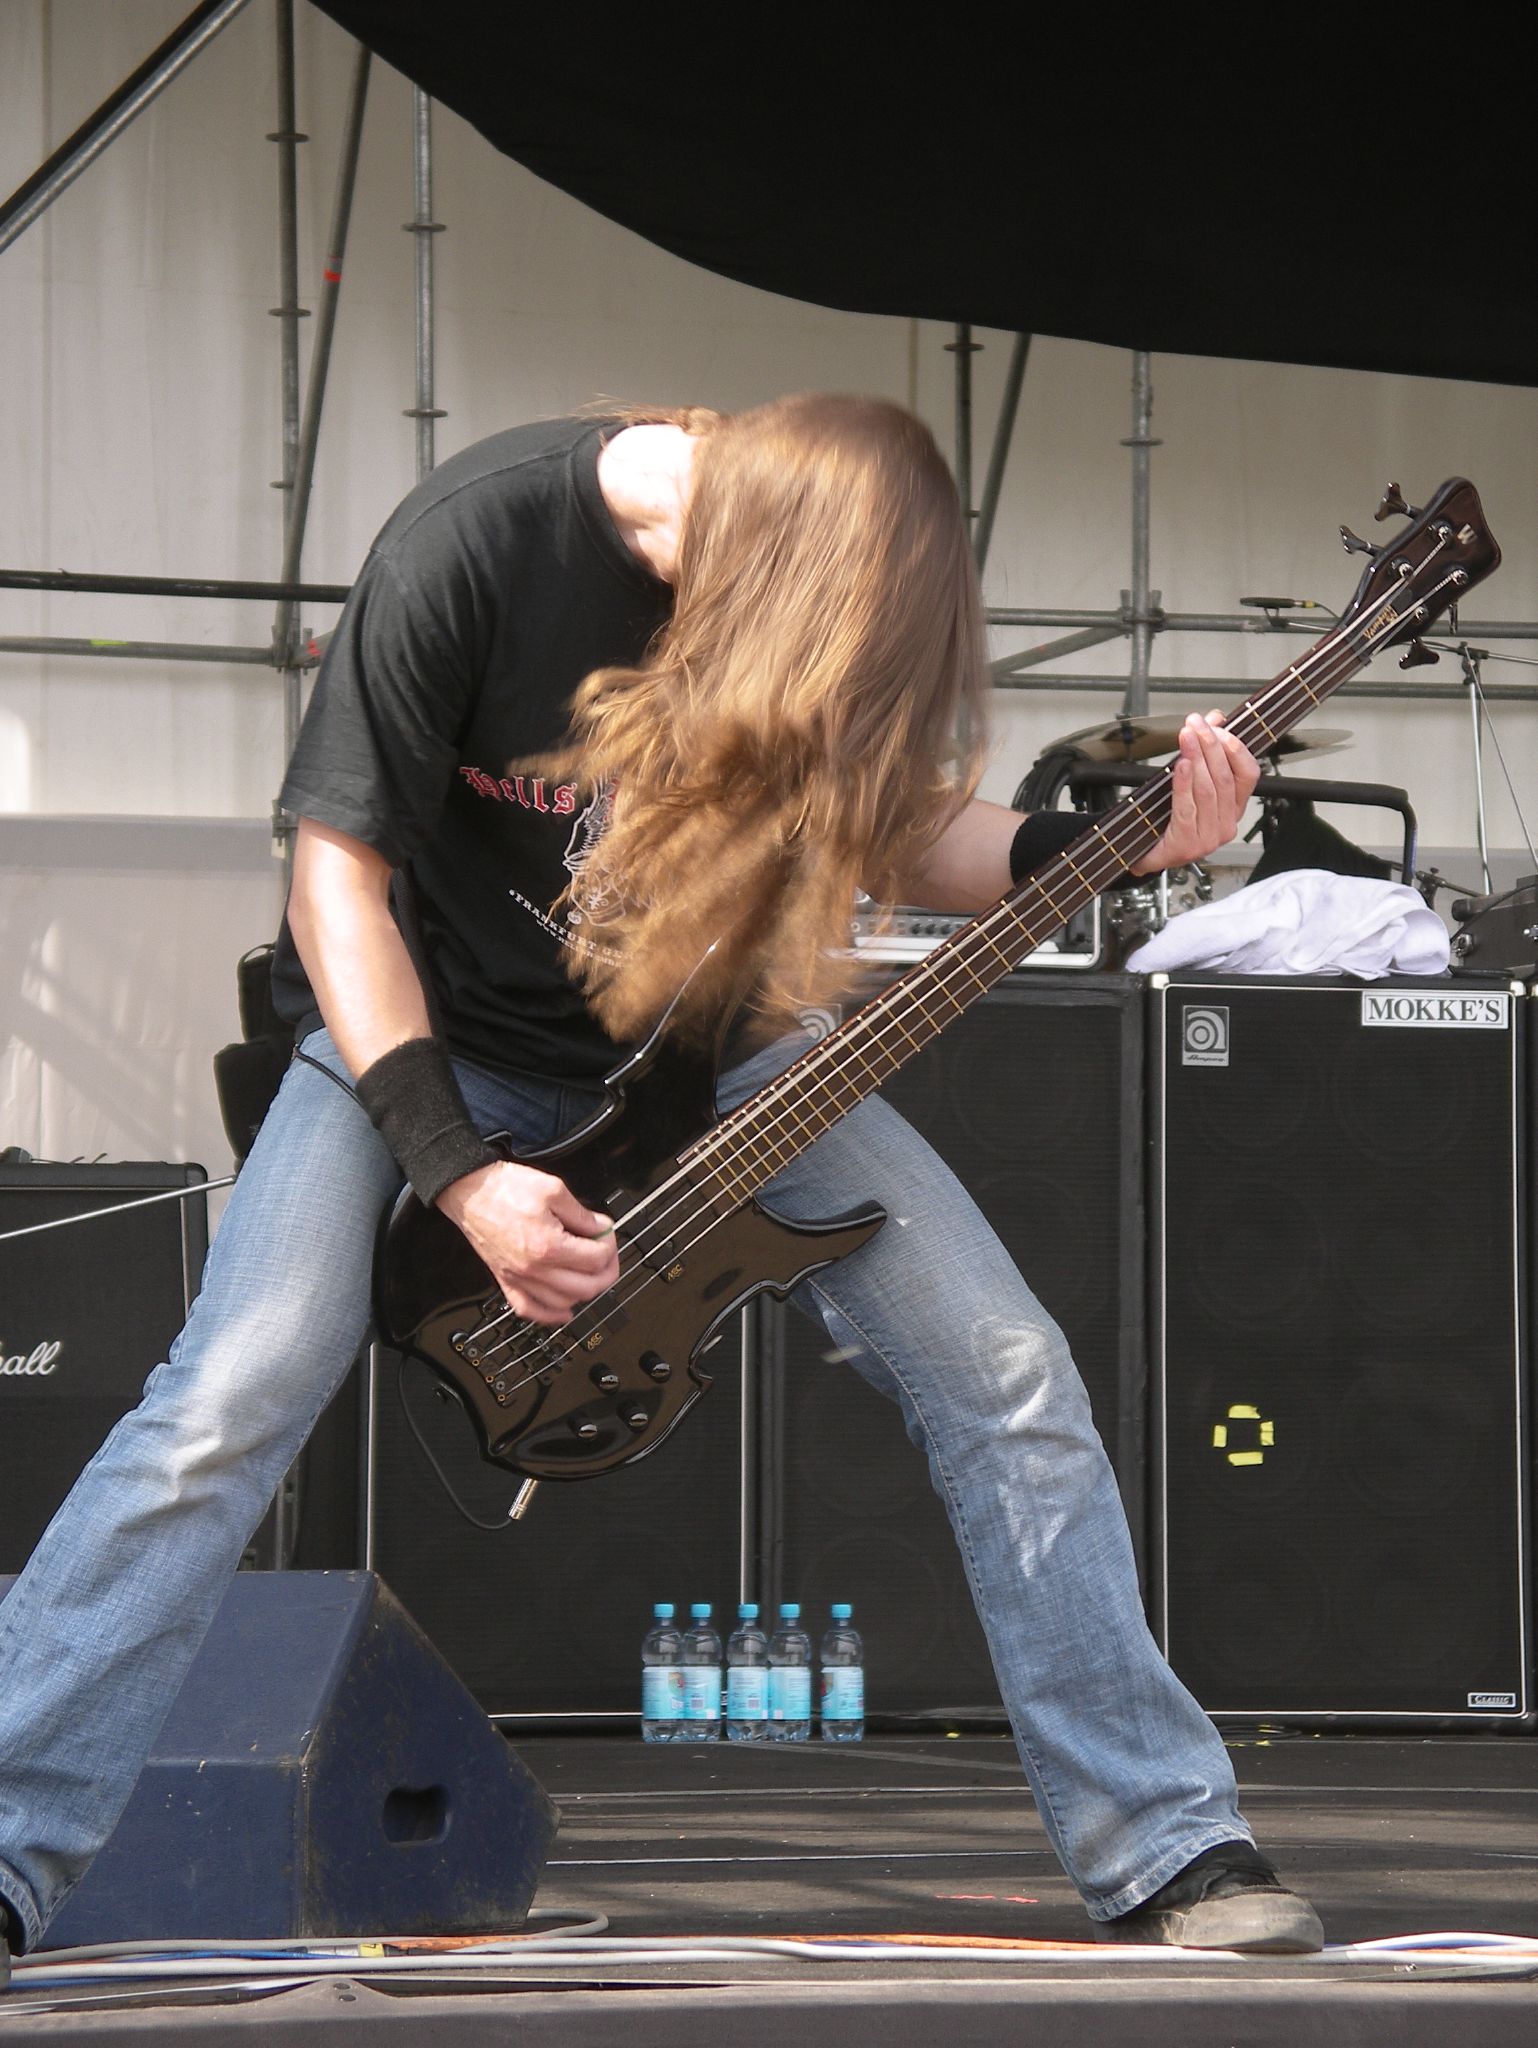 an image of man playing bass on stage